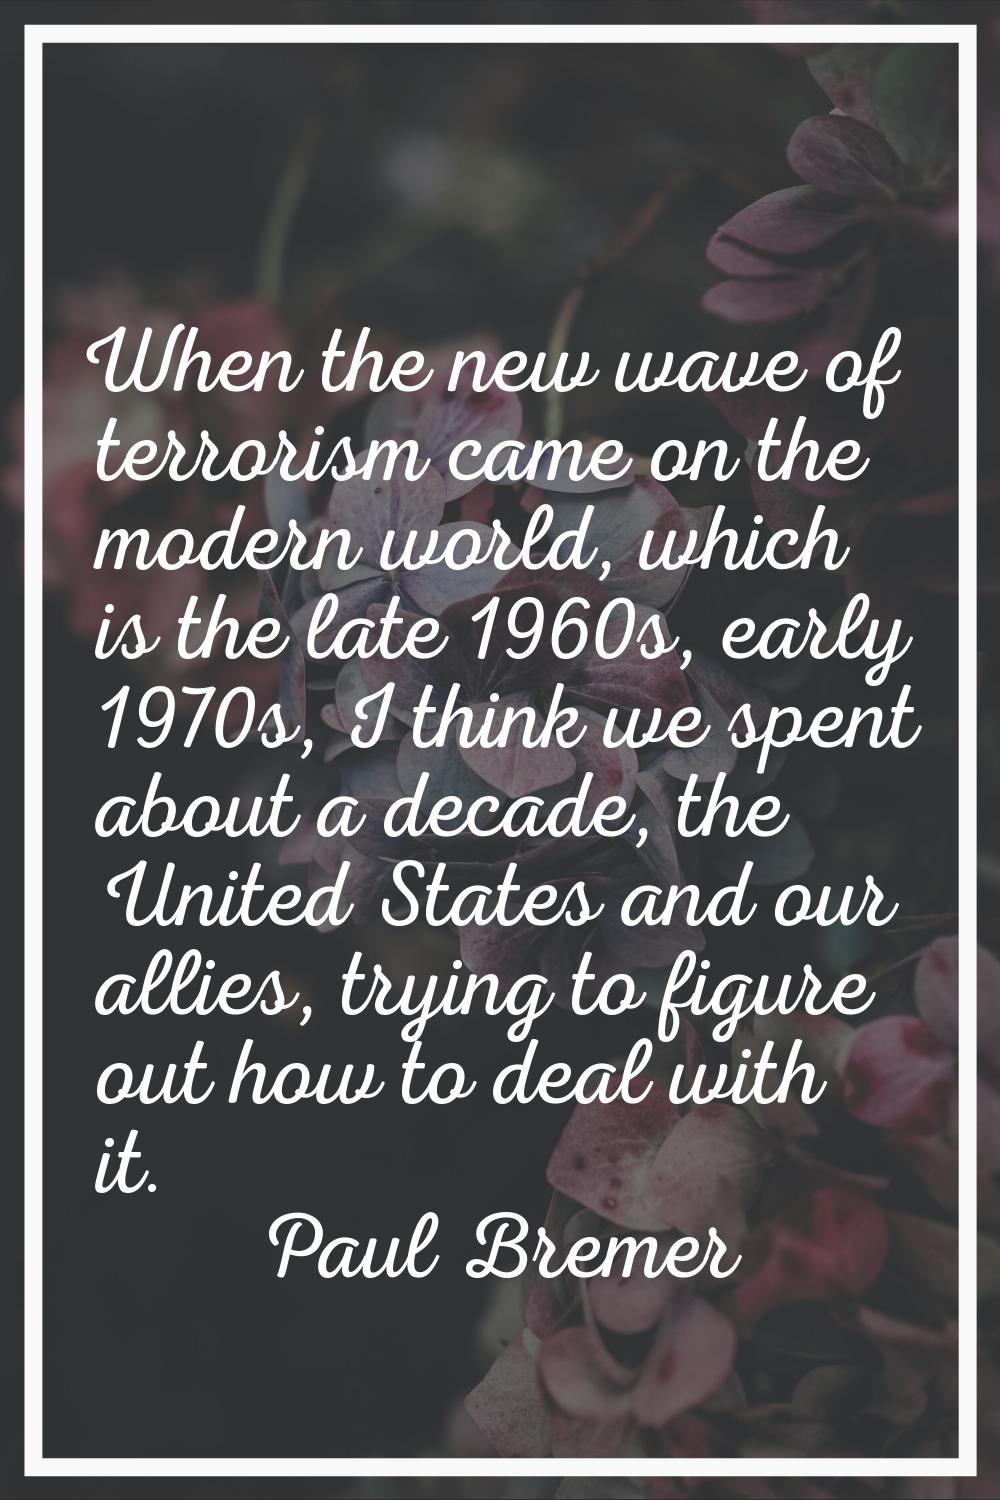 When the new wave of terrorism came on the modern world, which is the late 1960s, early 1970s, I th